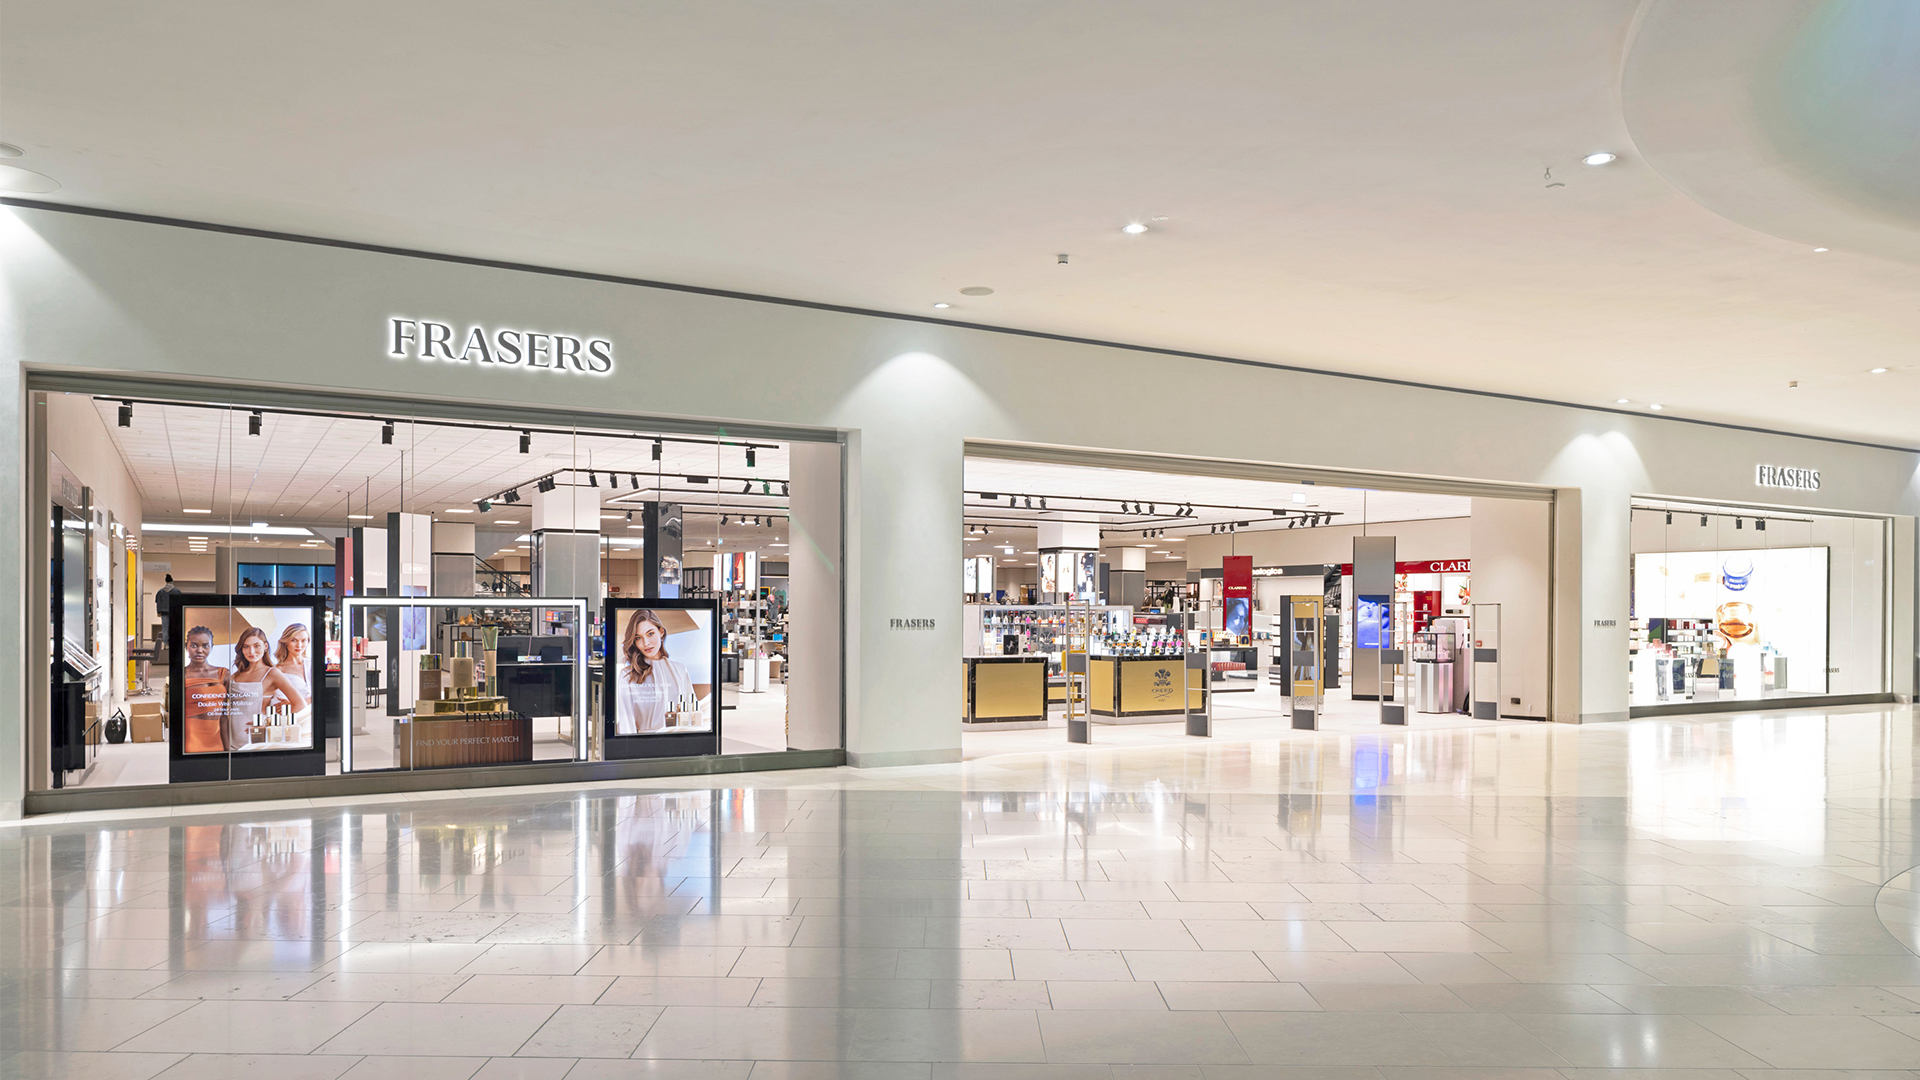 Frasers opens new store in Ireland